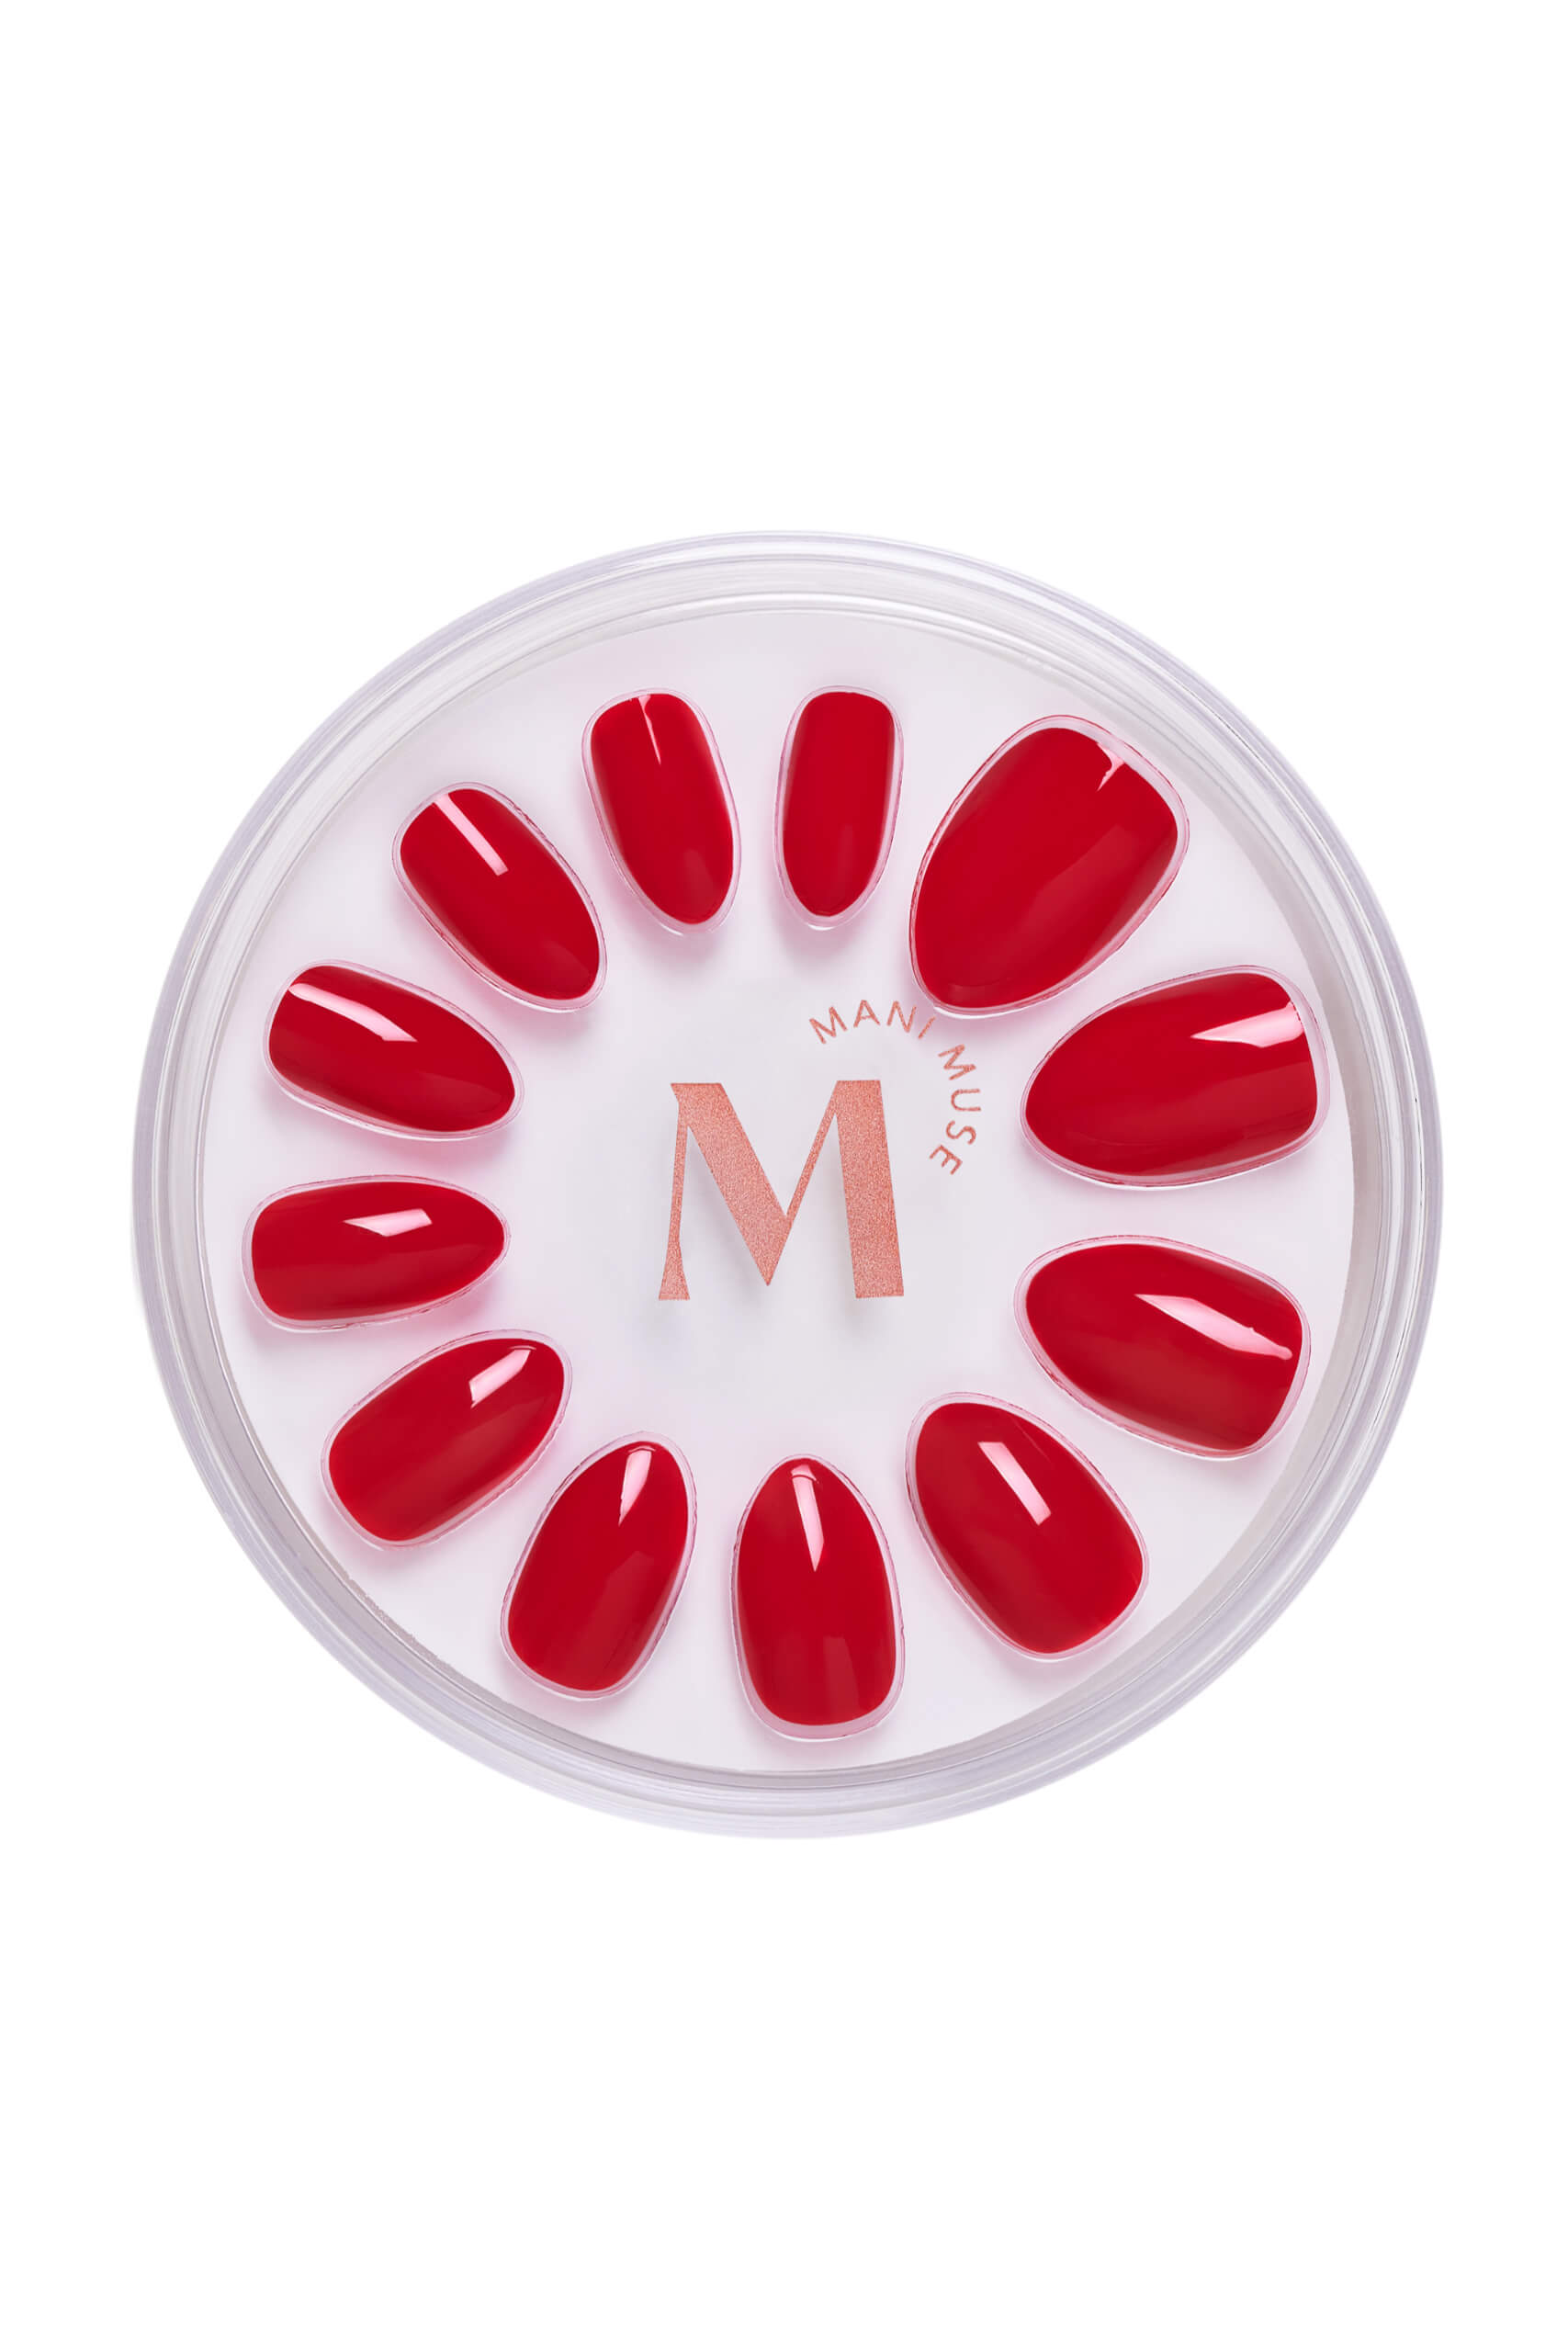 Mani Muse Caught Red Handed Press-on Nails - Almond